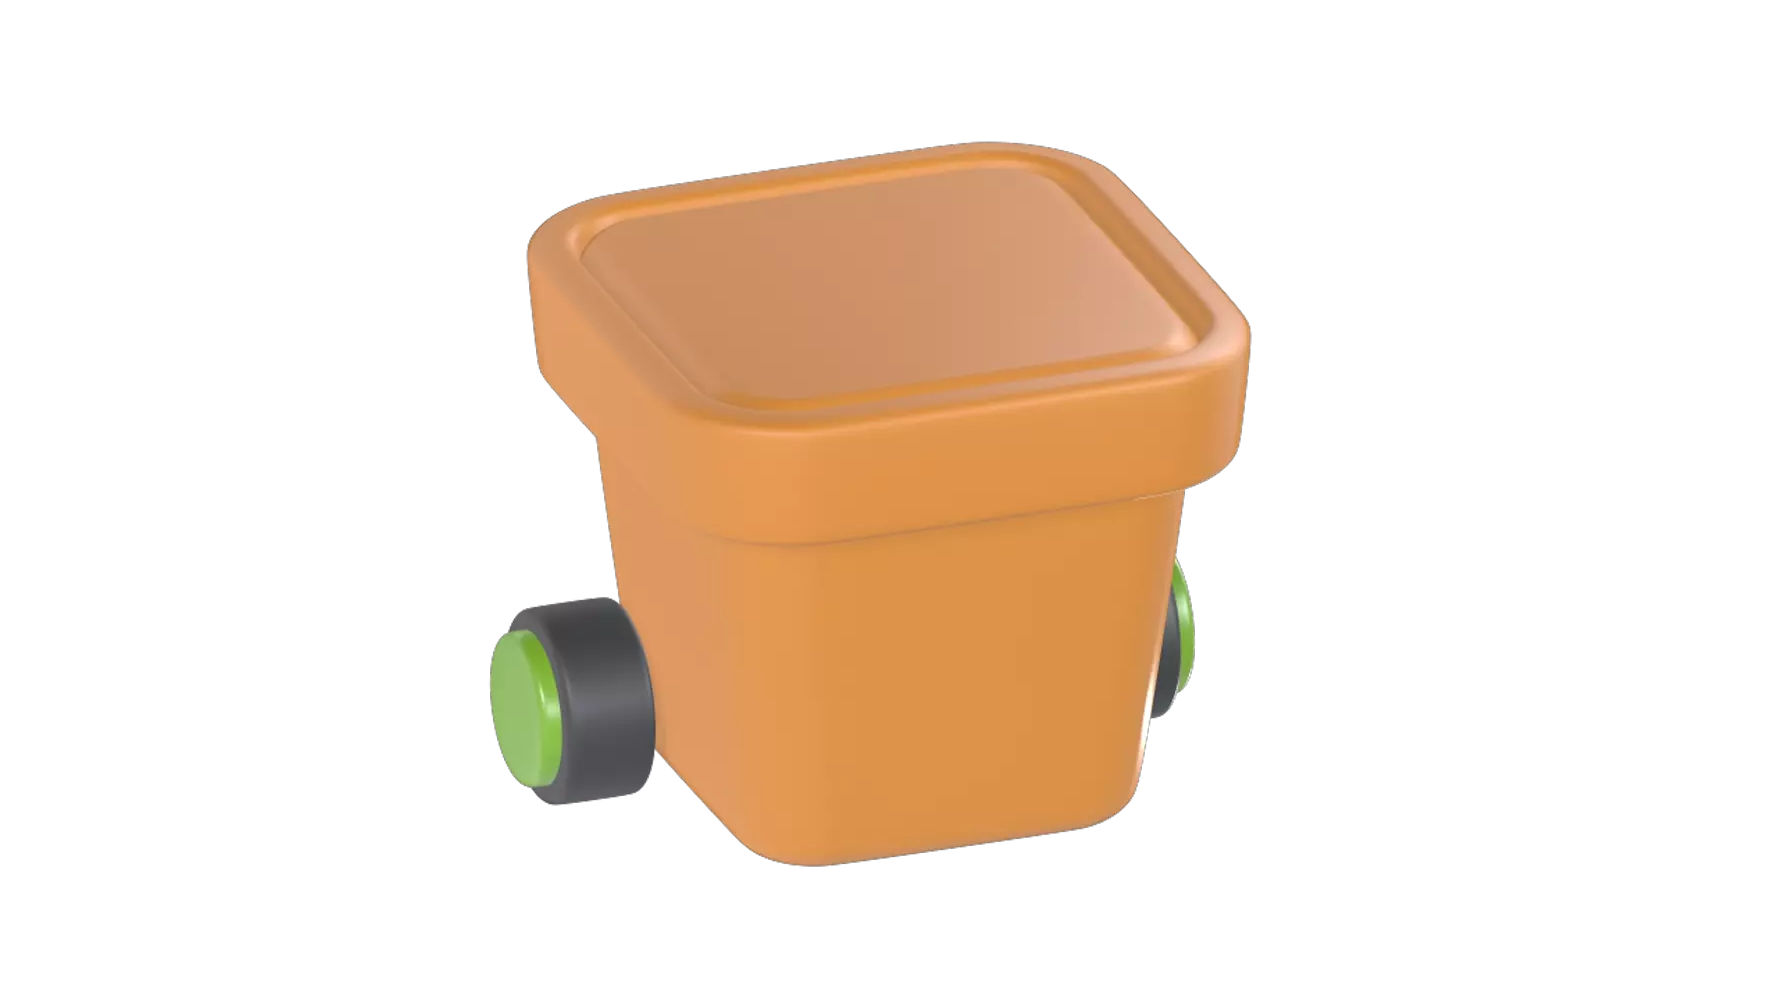 Trash Can 3D Graphic